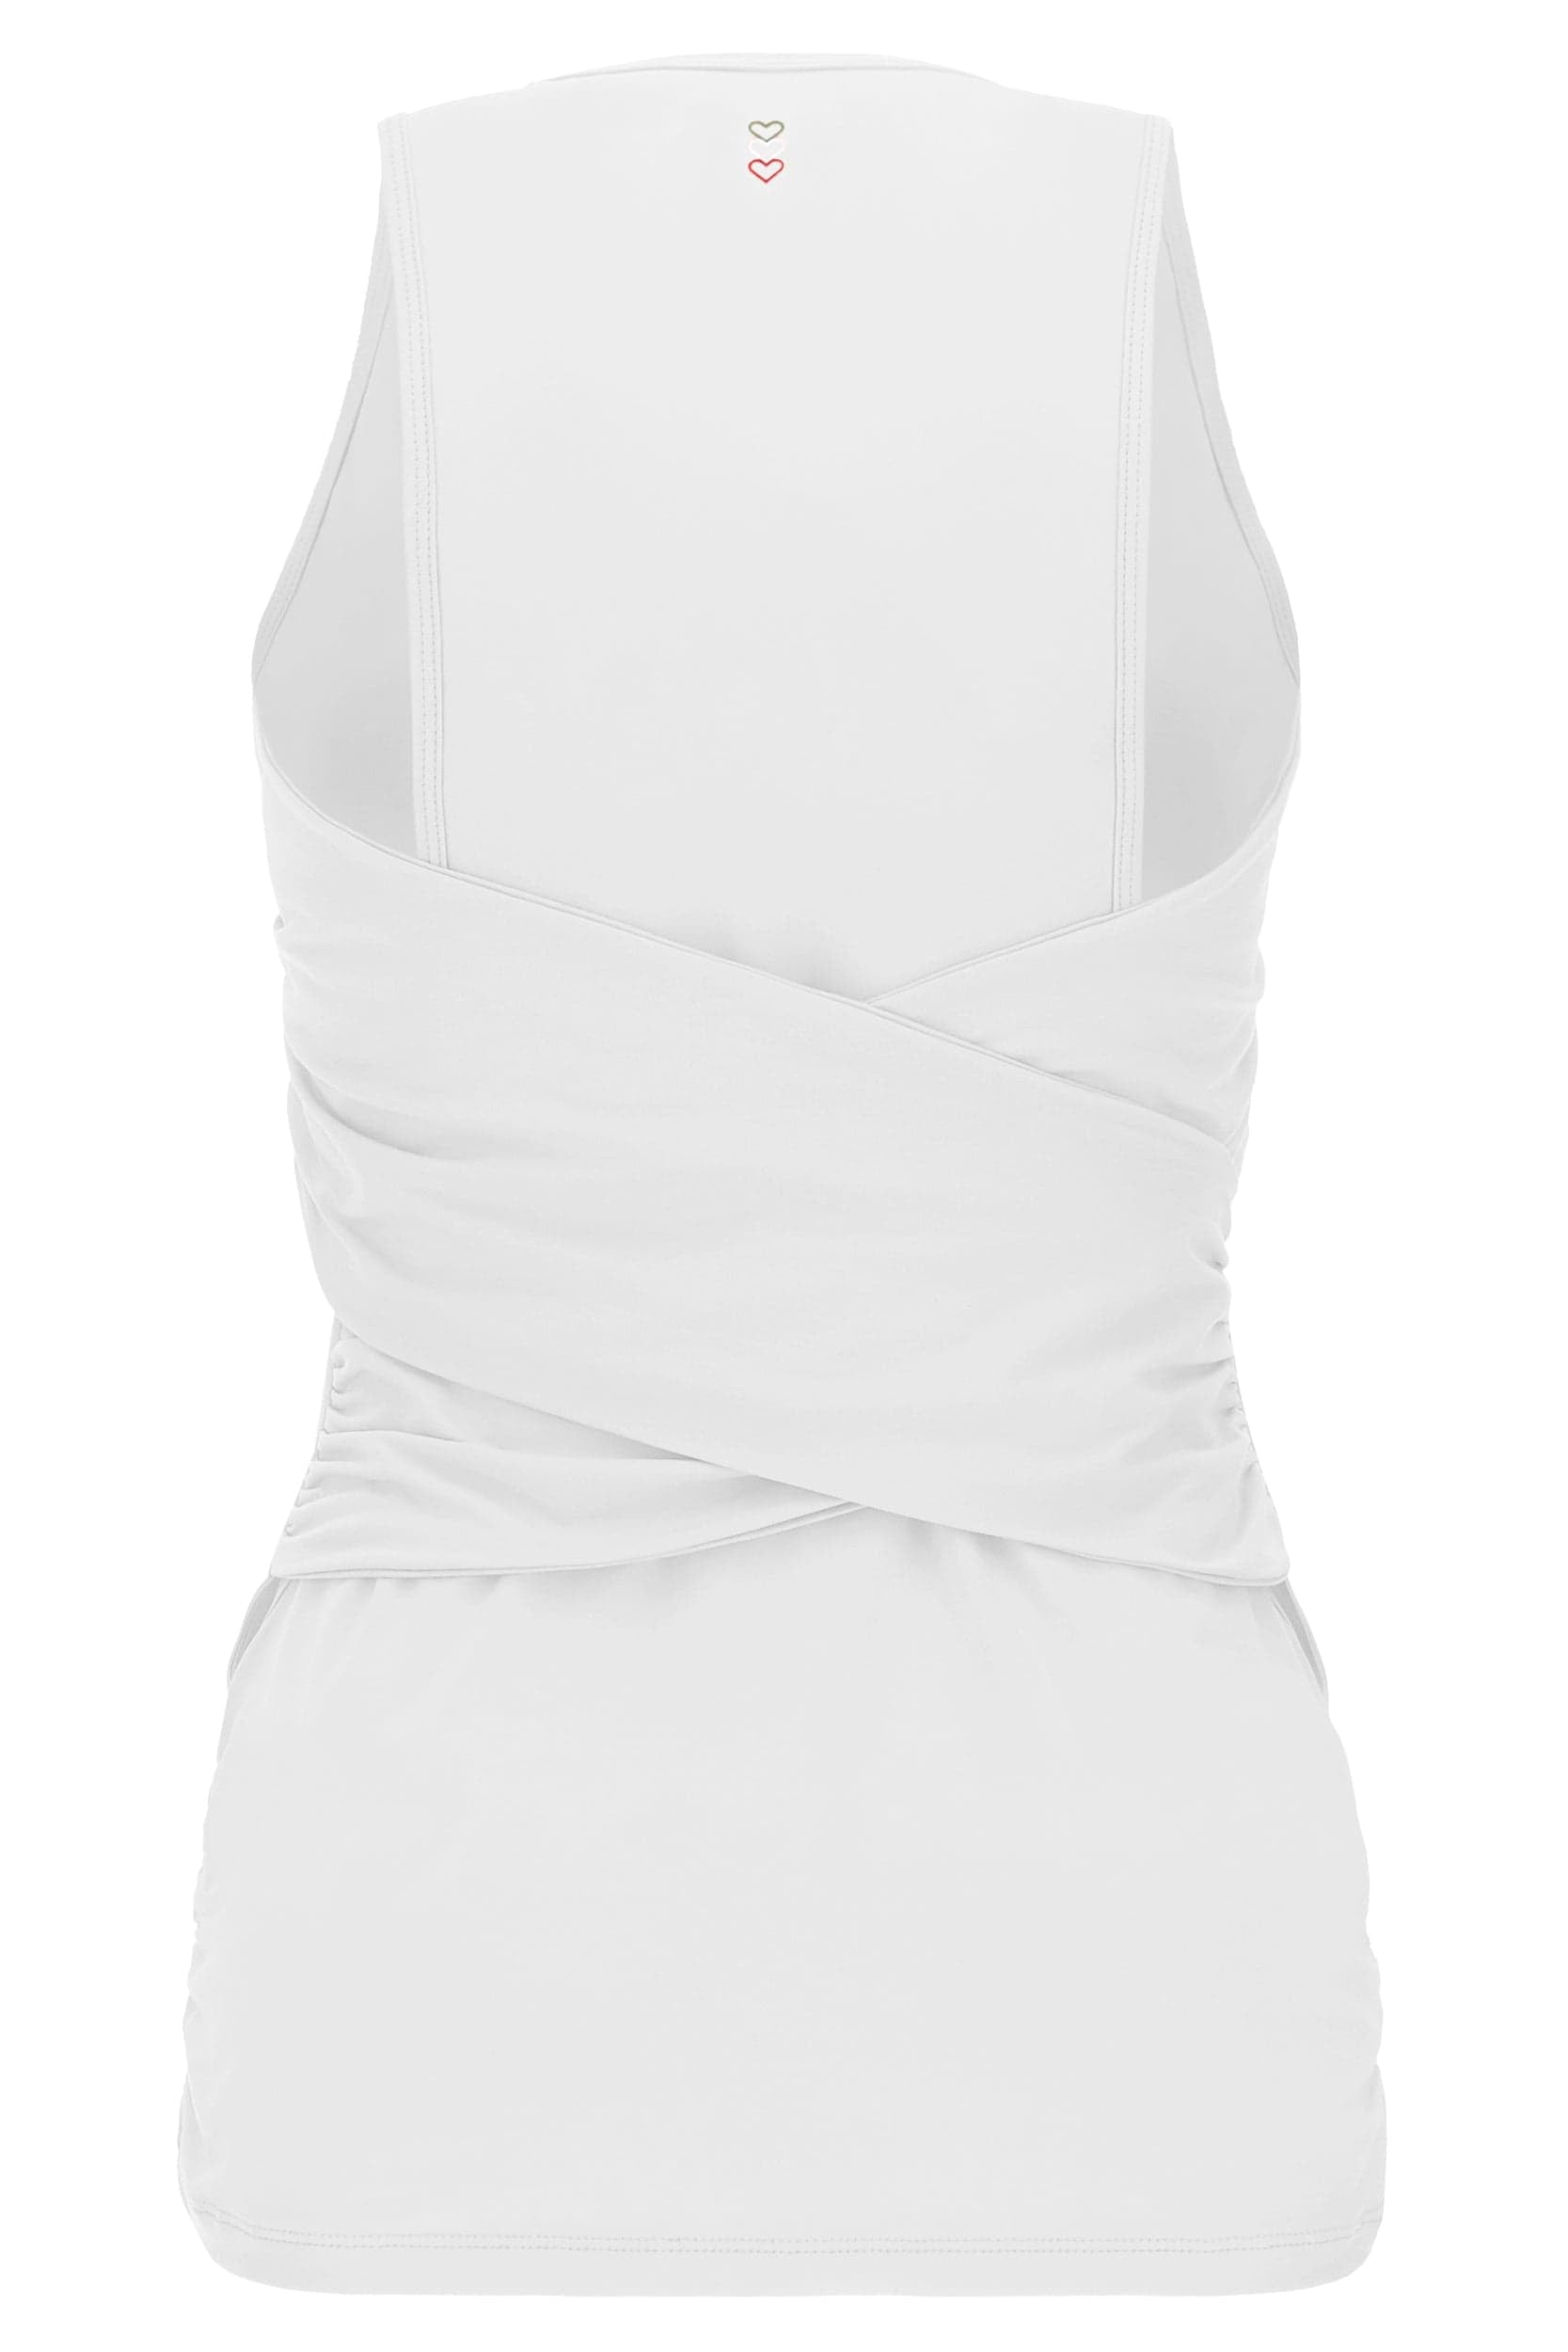 Yoga tank top with a criss cross back - White 4